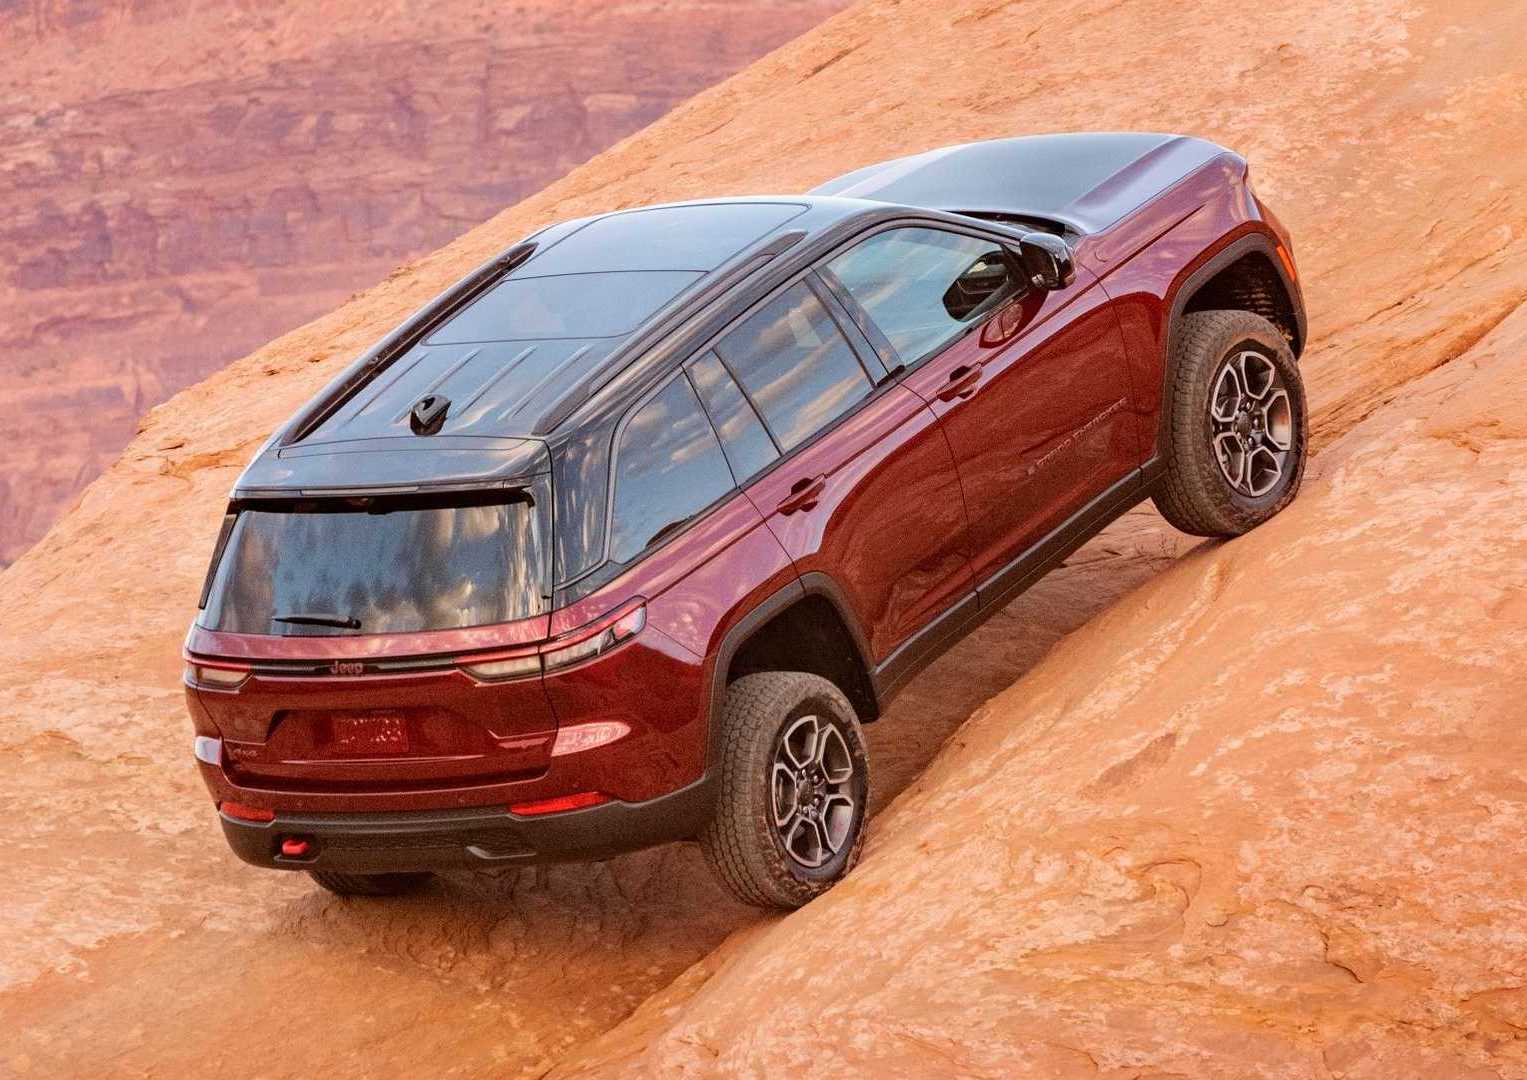 2022 Jeep Grand Cherokee .. Its here to compete